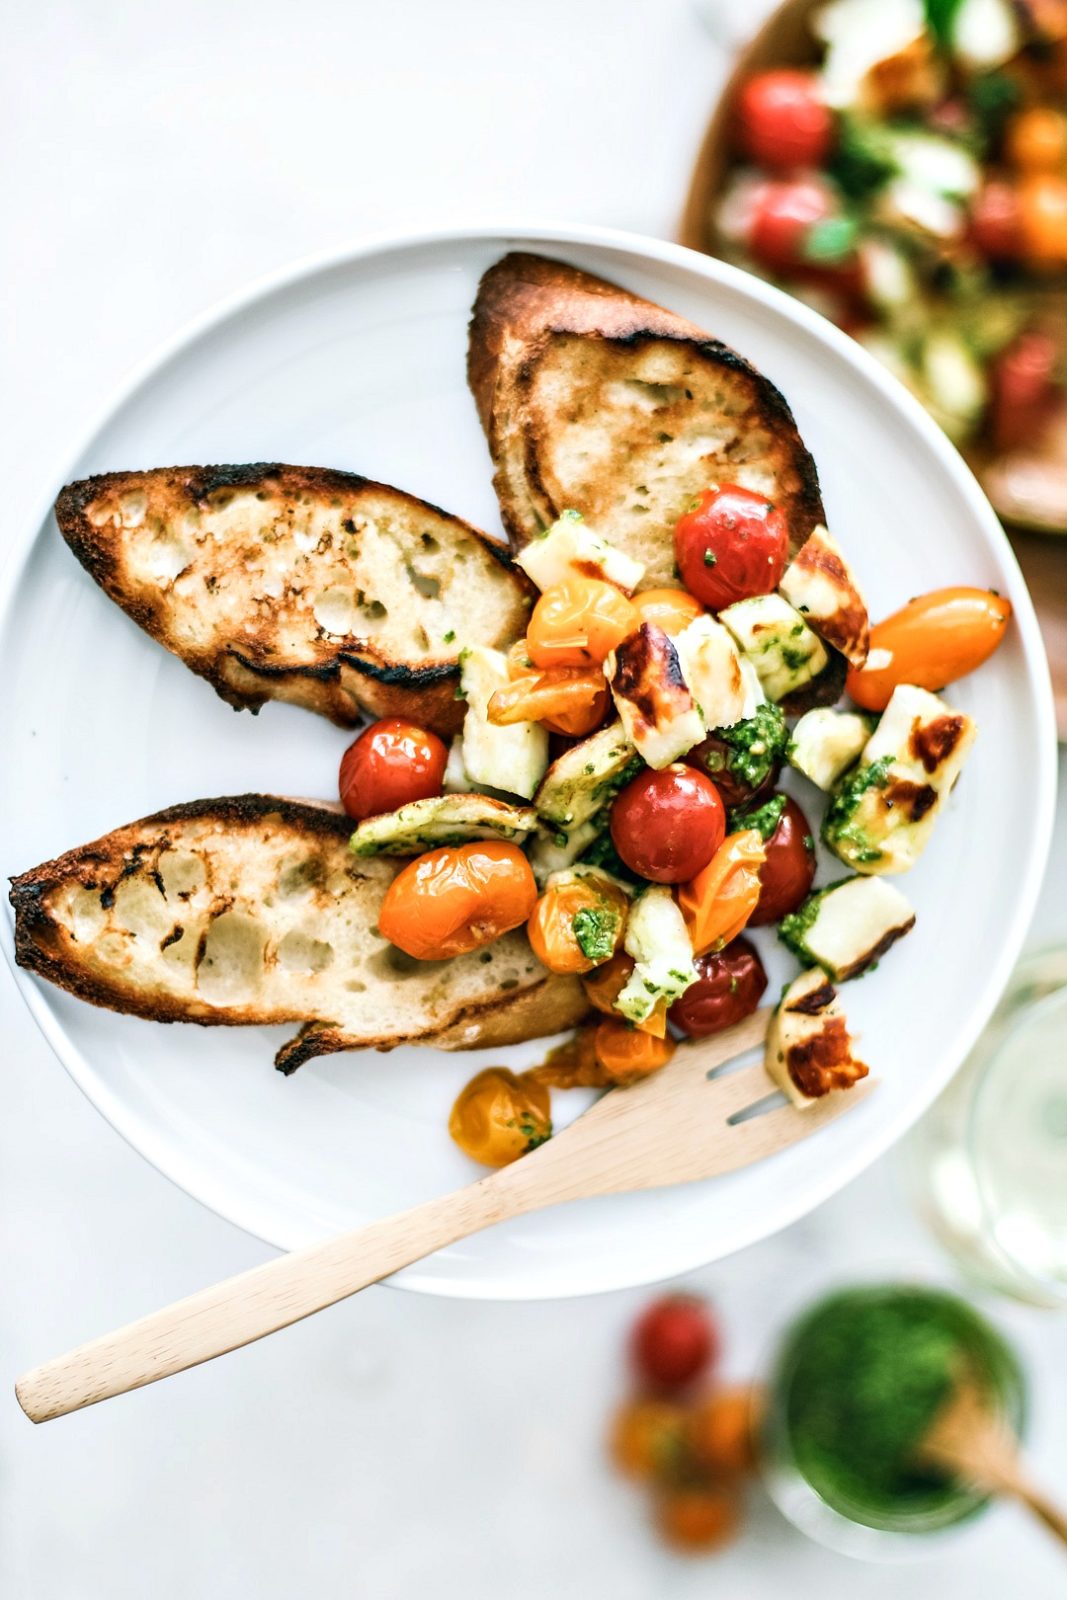 Grilled Halloumi and Burst Tomato Salad With Pesto with grilled bread